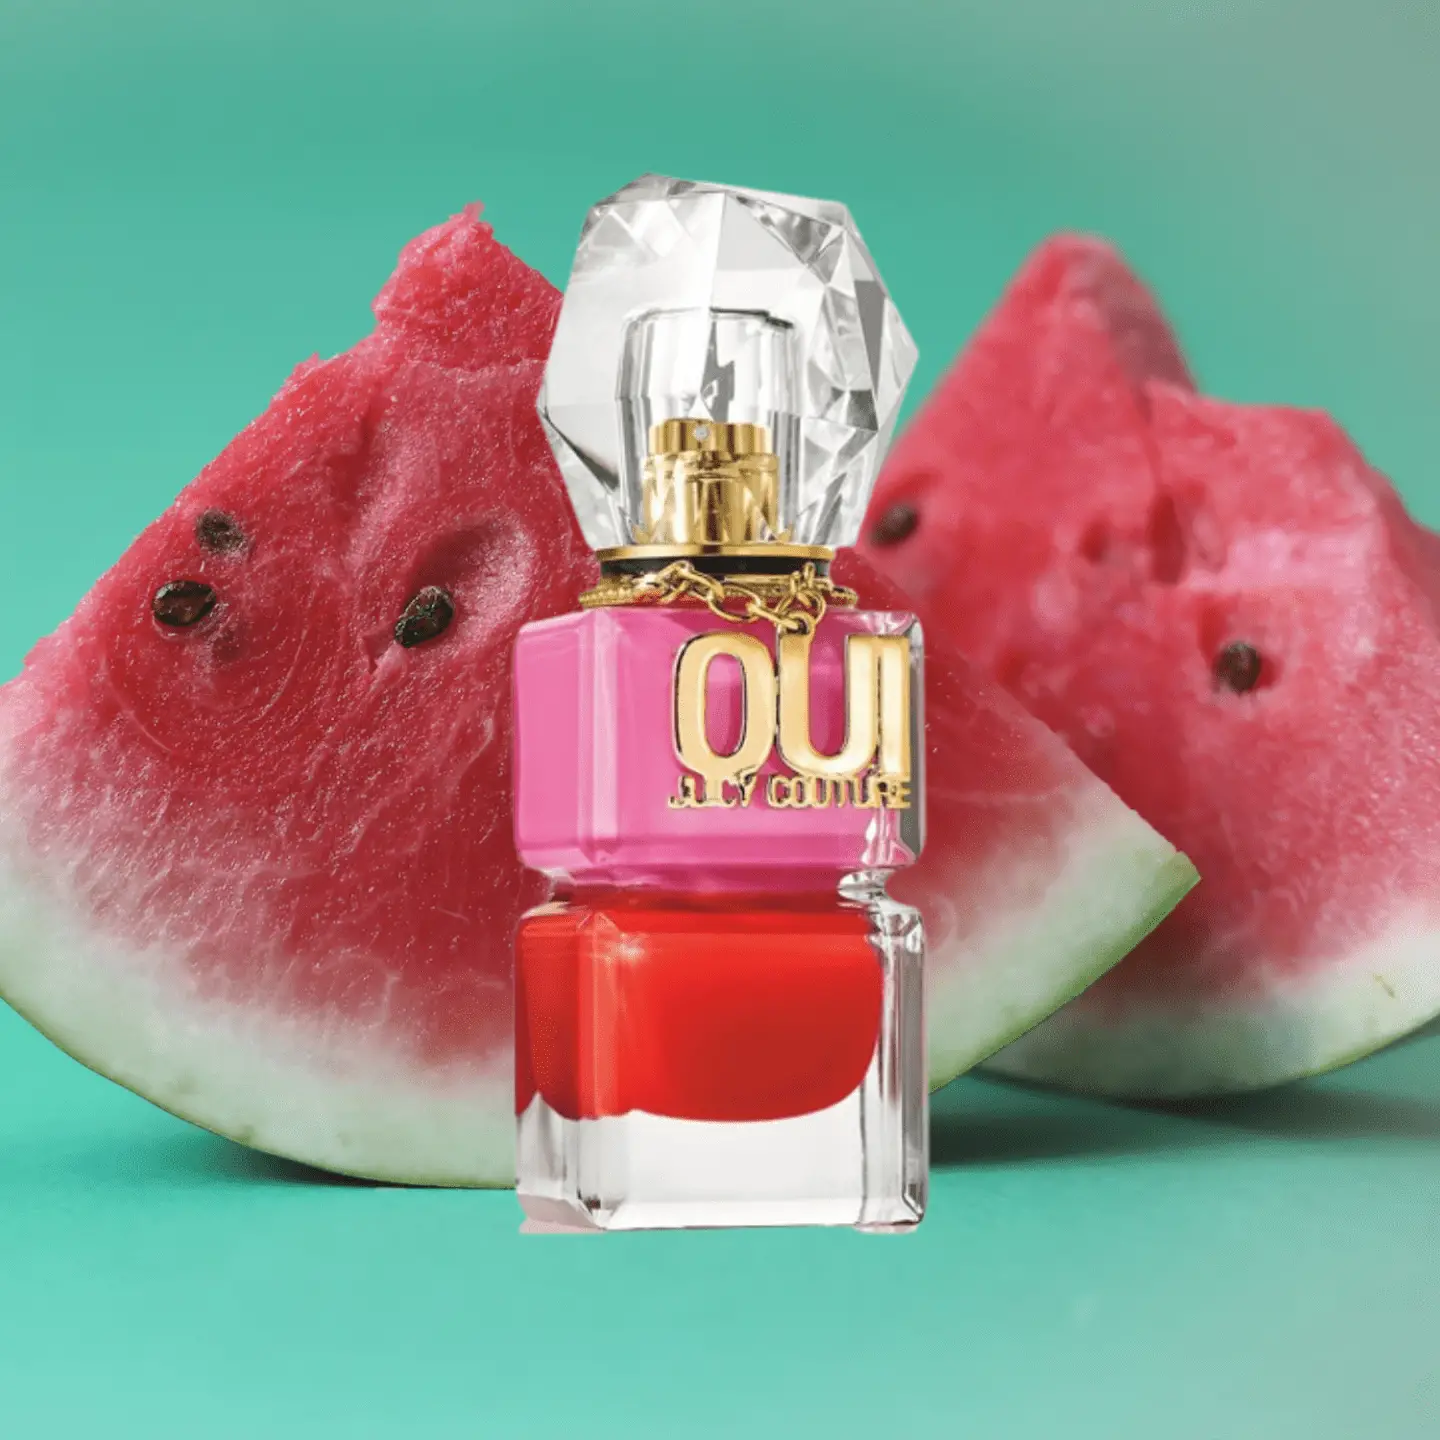 Juicy Couture Oui
Best Watermelon perfumes